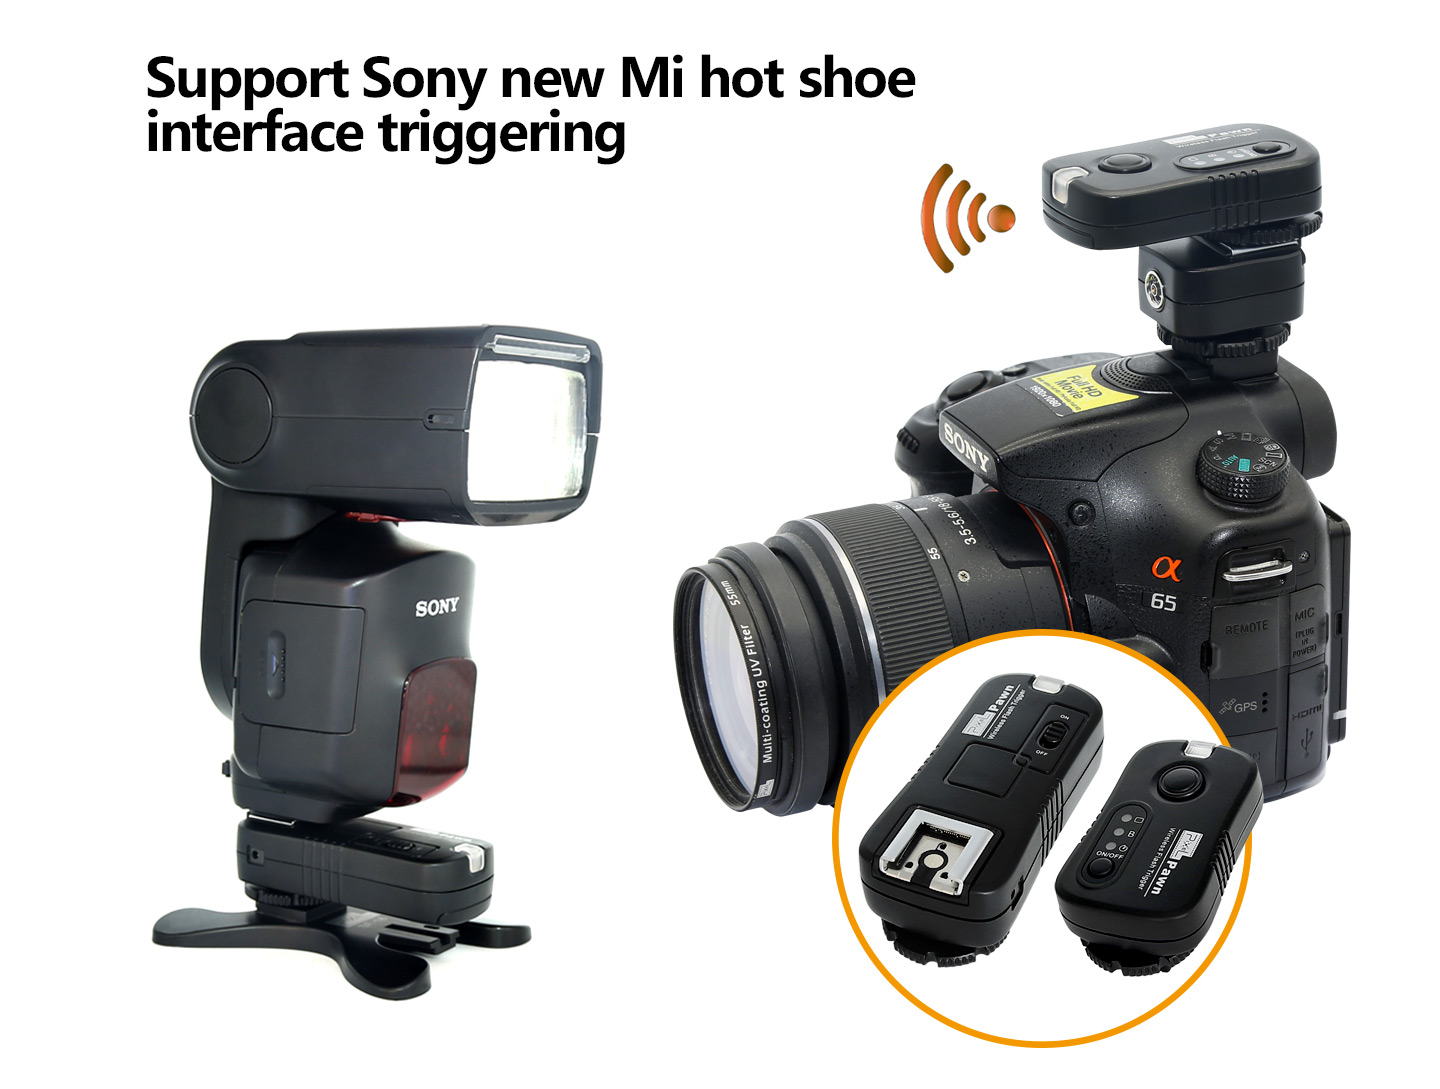 Support Sony new Mi hot shoe interface triggering